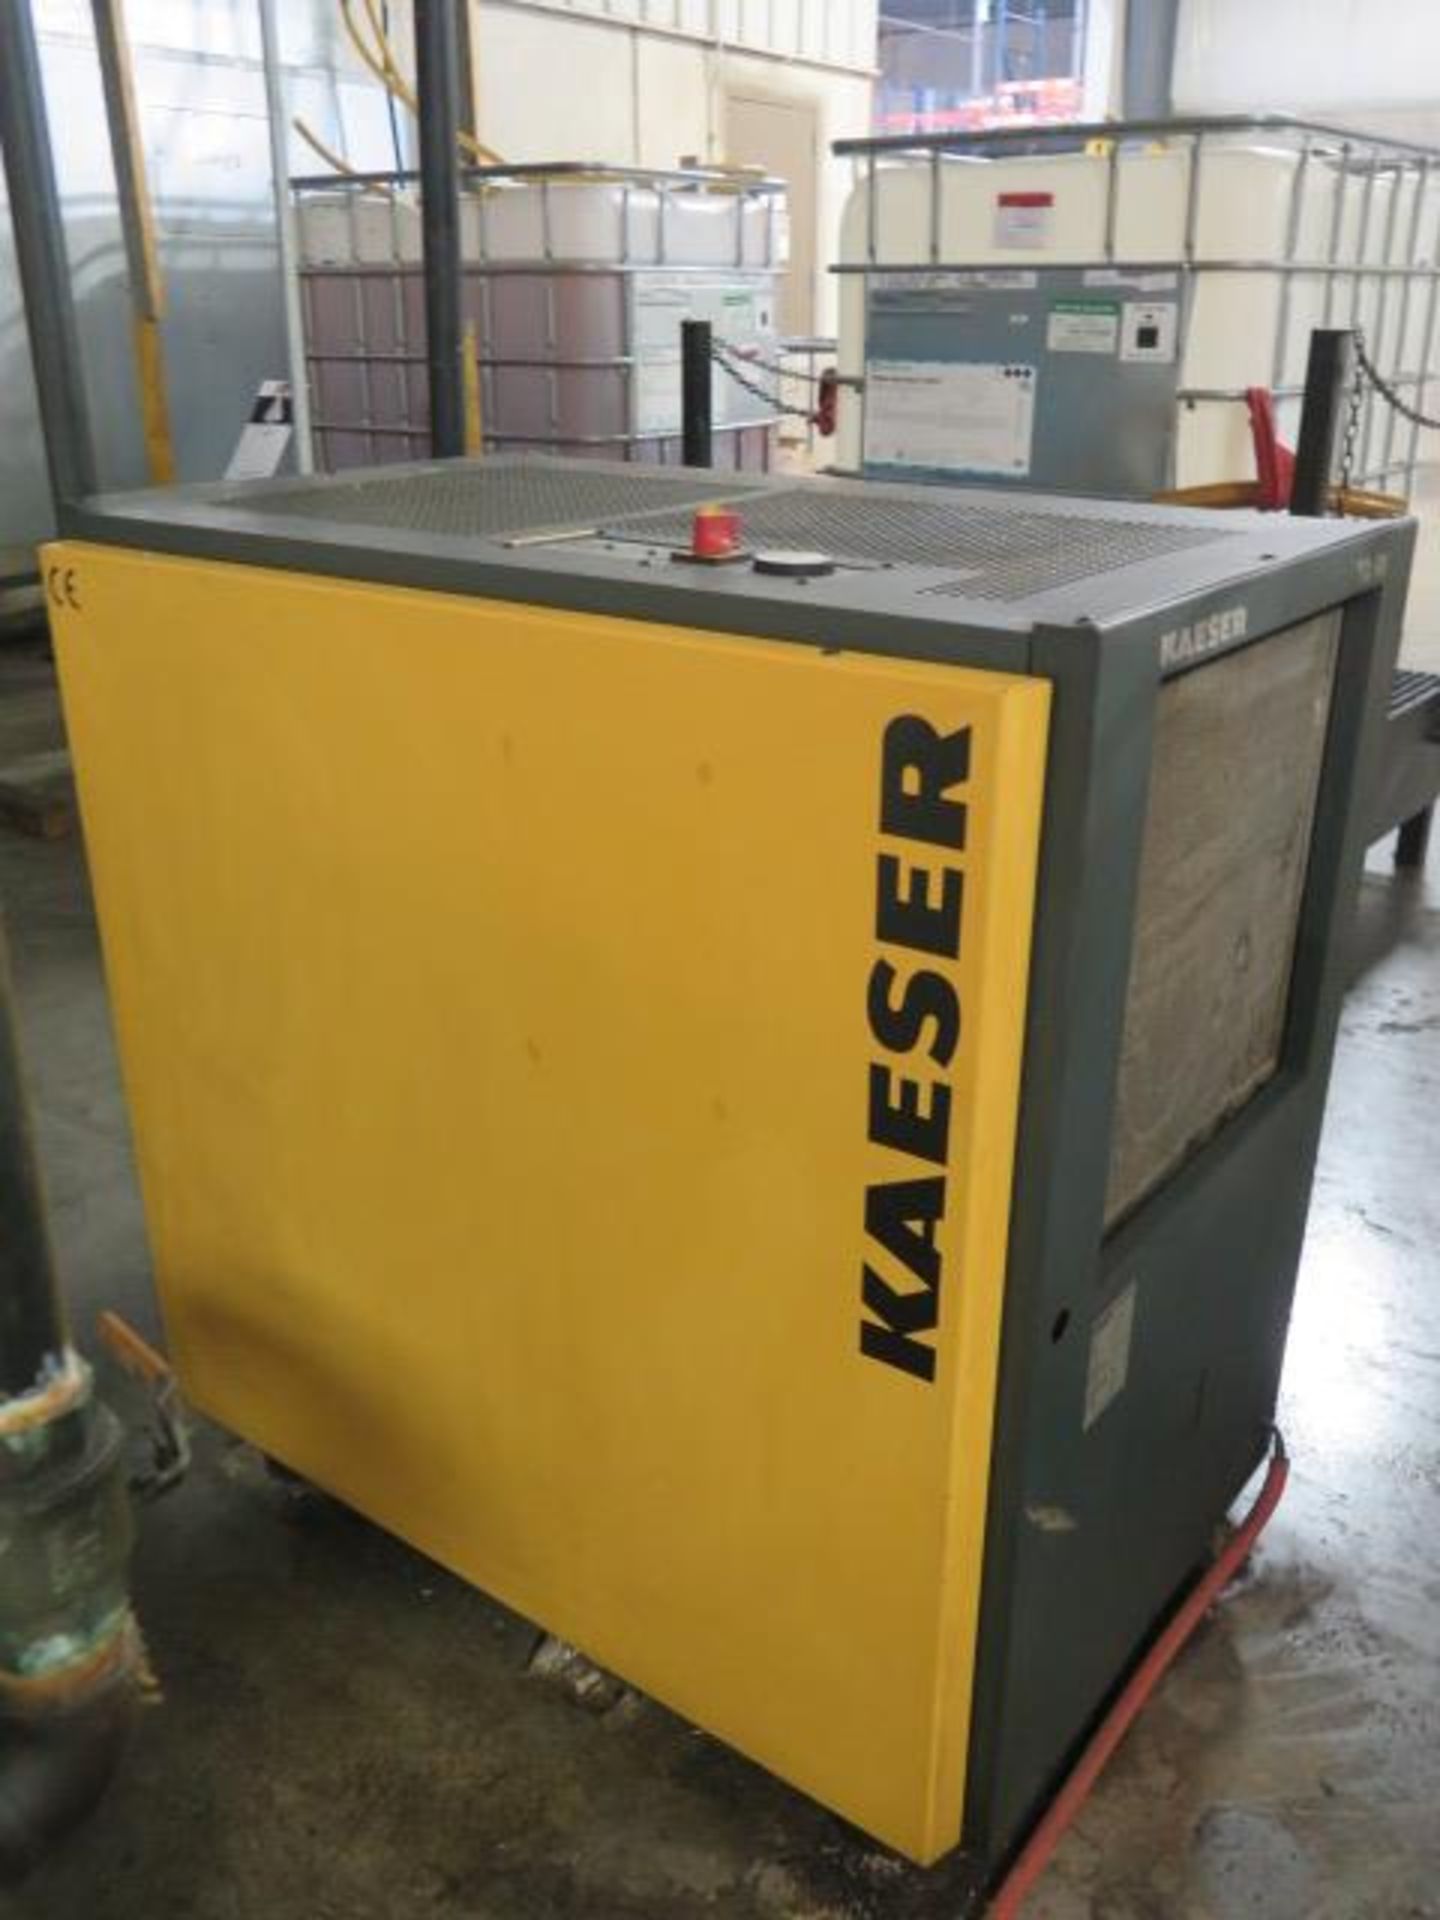 2005 Kaeser TD61 Refrigerated Air Dryer s/n 1187 (SOLD AS-IS - NO WARRANTY) - Image 2 of 6